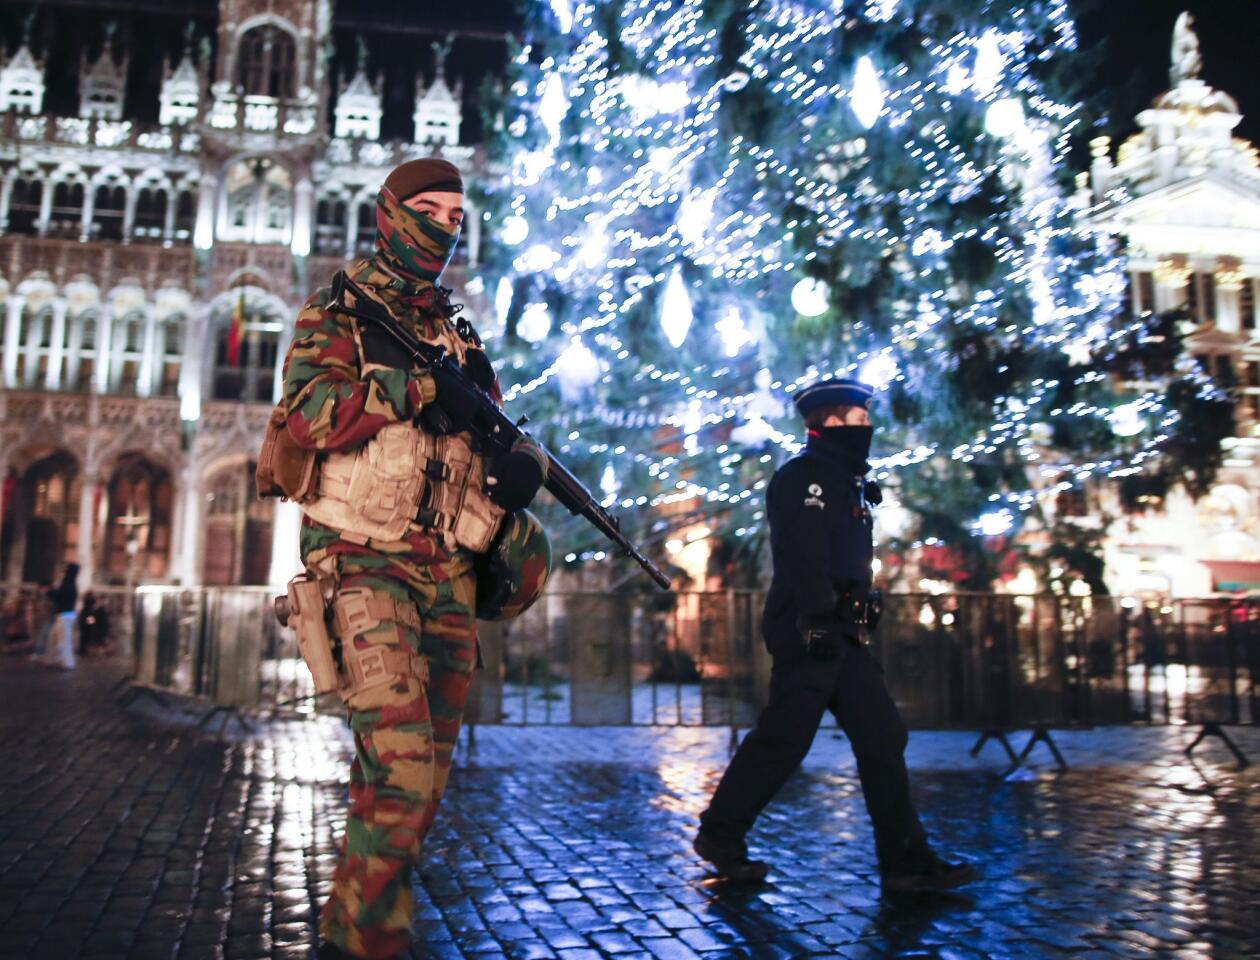 Brussels on high security alert